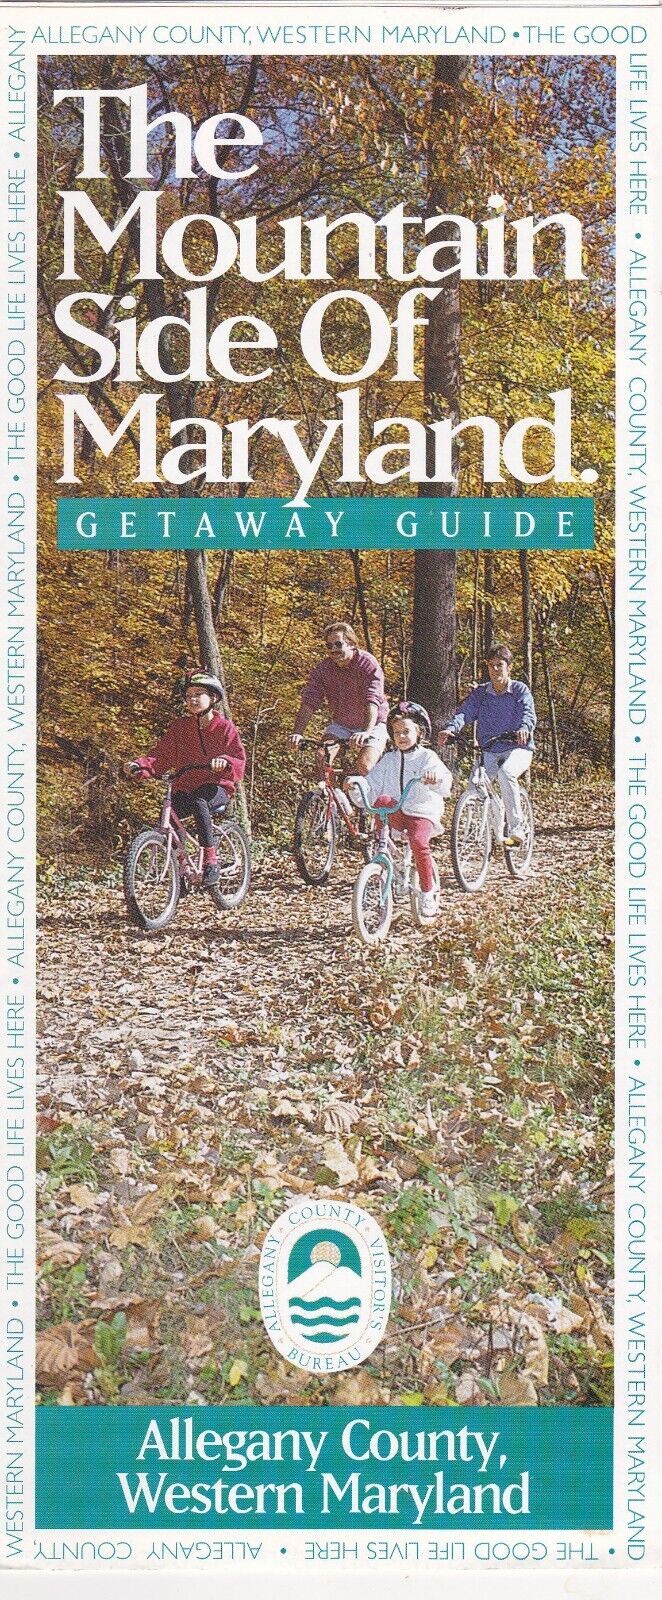 1990's Allegany County Maryland Promotional Tourism Brochure